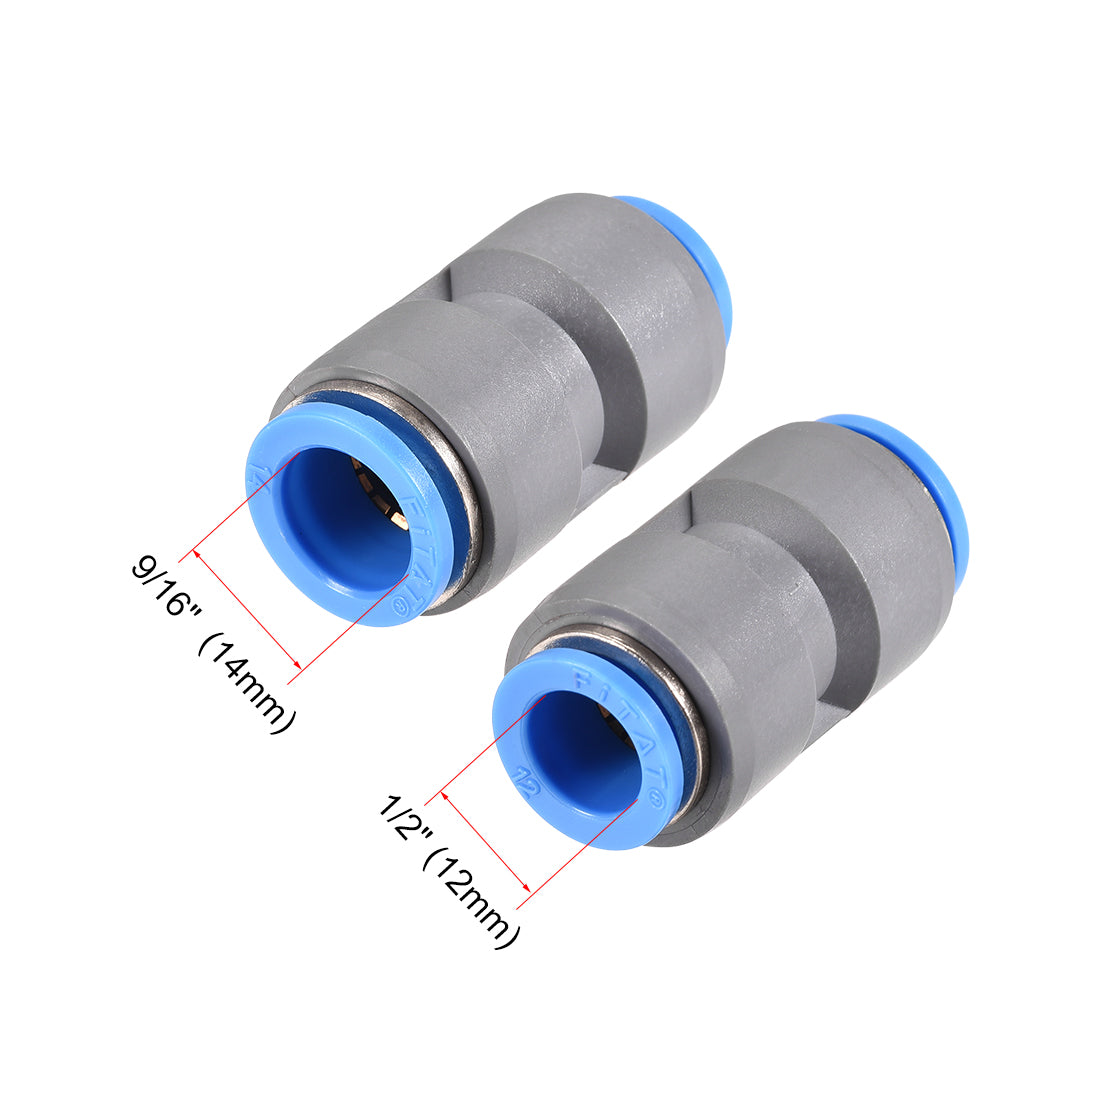 uxcell Uxcell Straight Push to Connector Reducer Fitting 14mm to 12mm Plastic Union Pipe Tube Fitting Grey 2Pcs